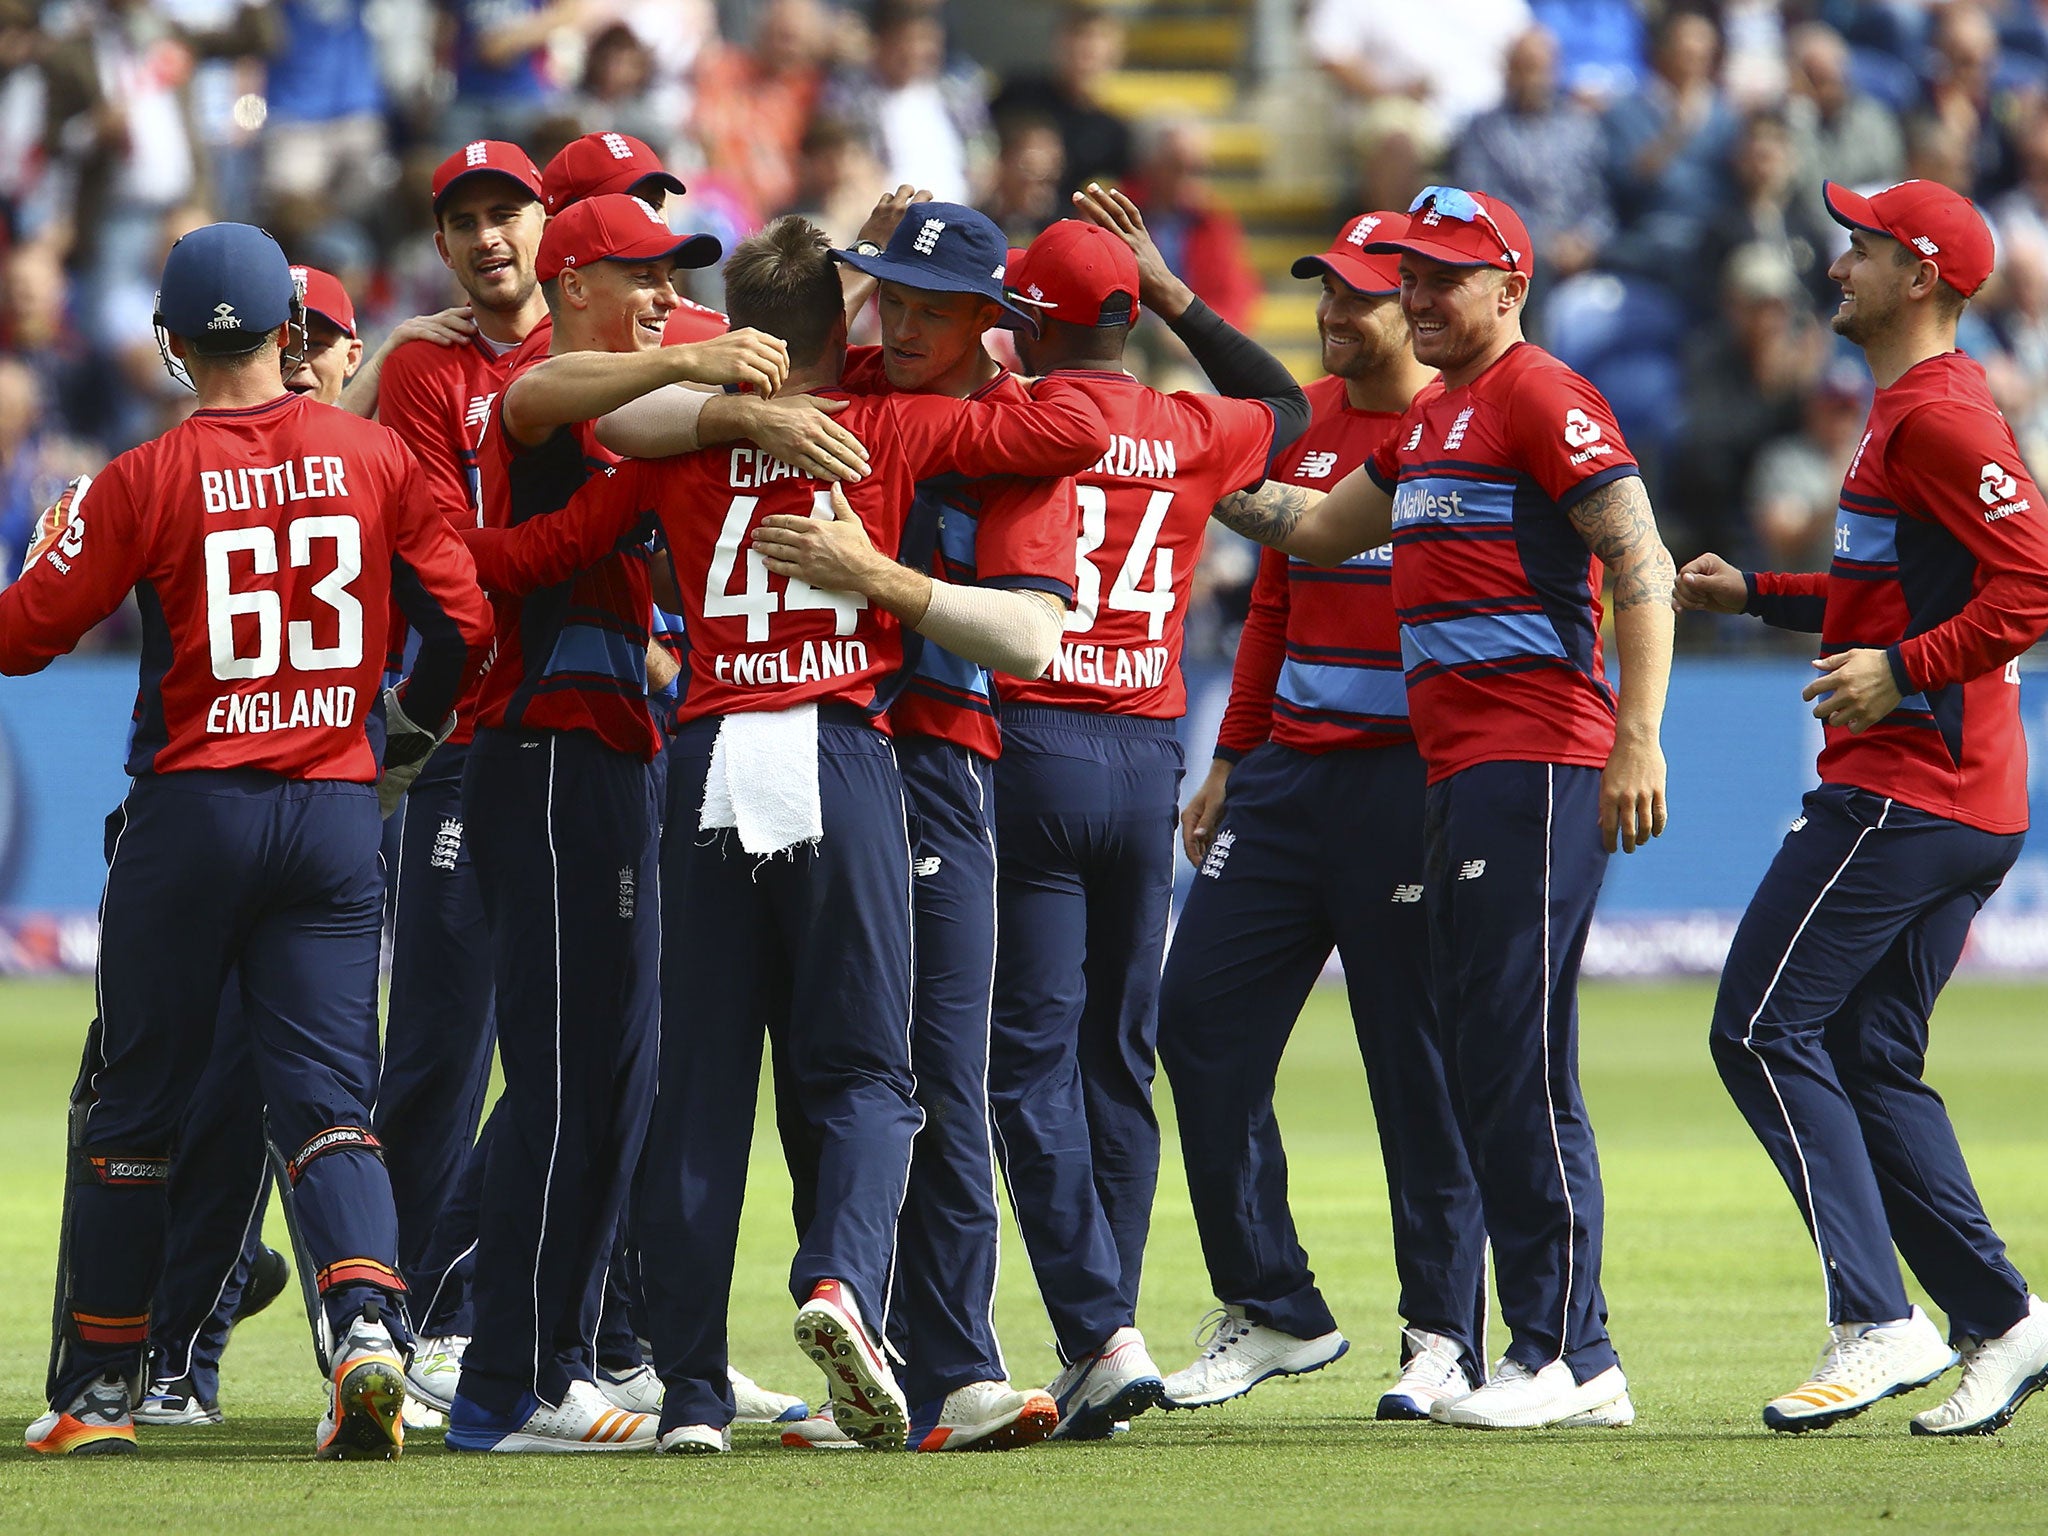 Only two men’s T20 internationals, and a solitary women’s T20I, will be available to watch free-to-air on the BBC